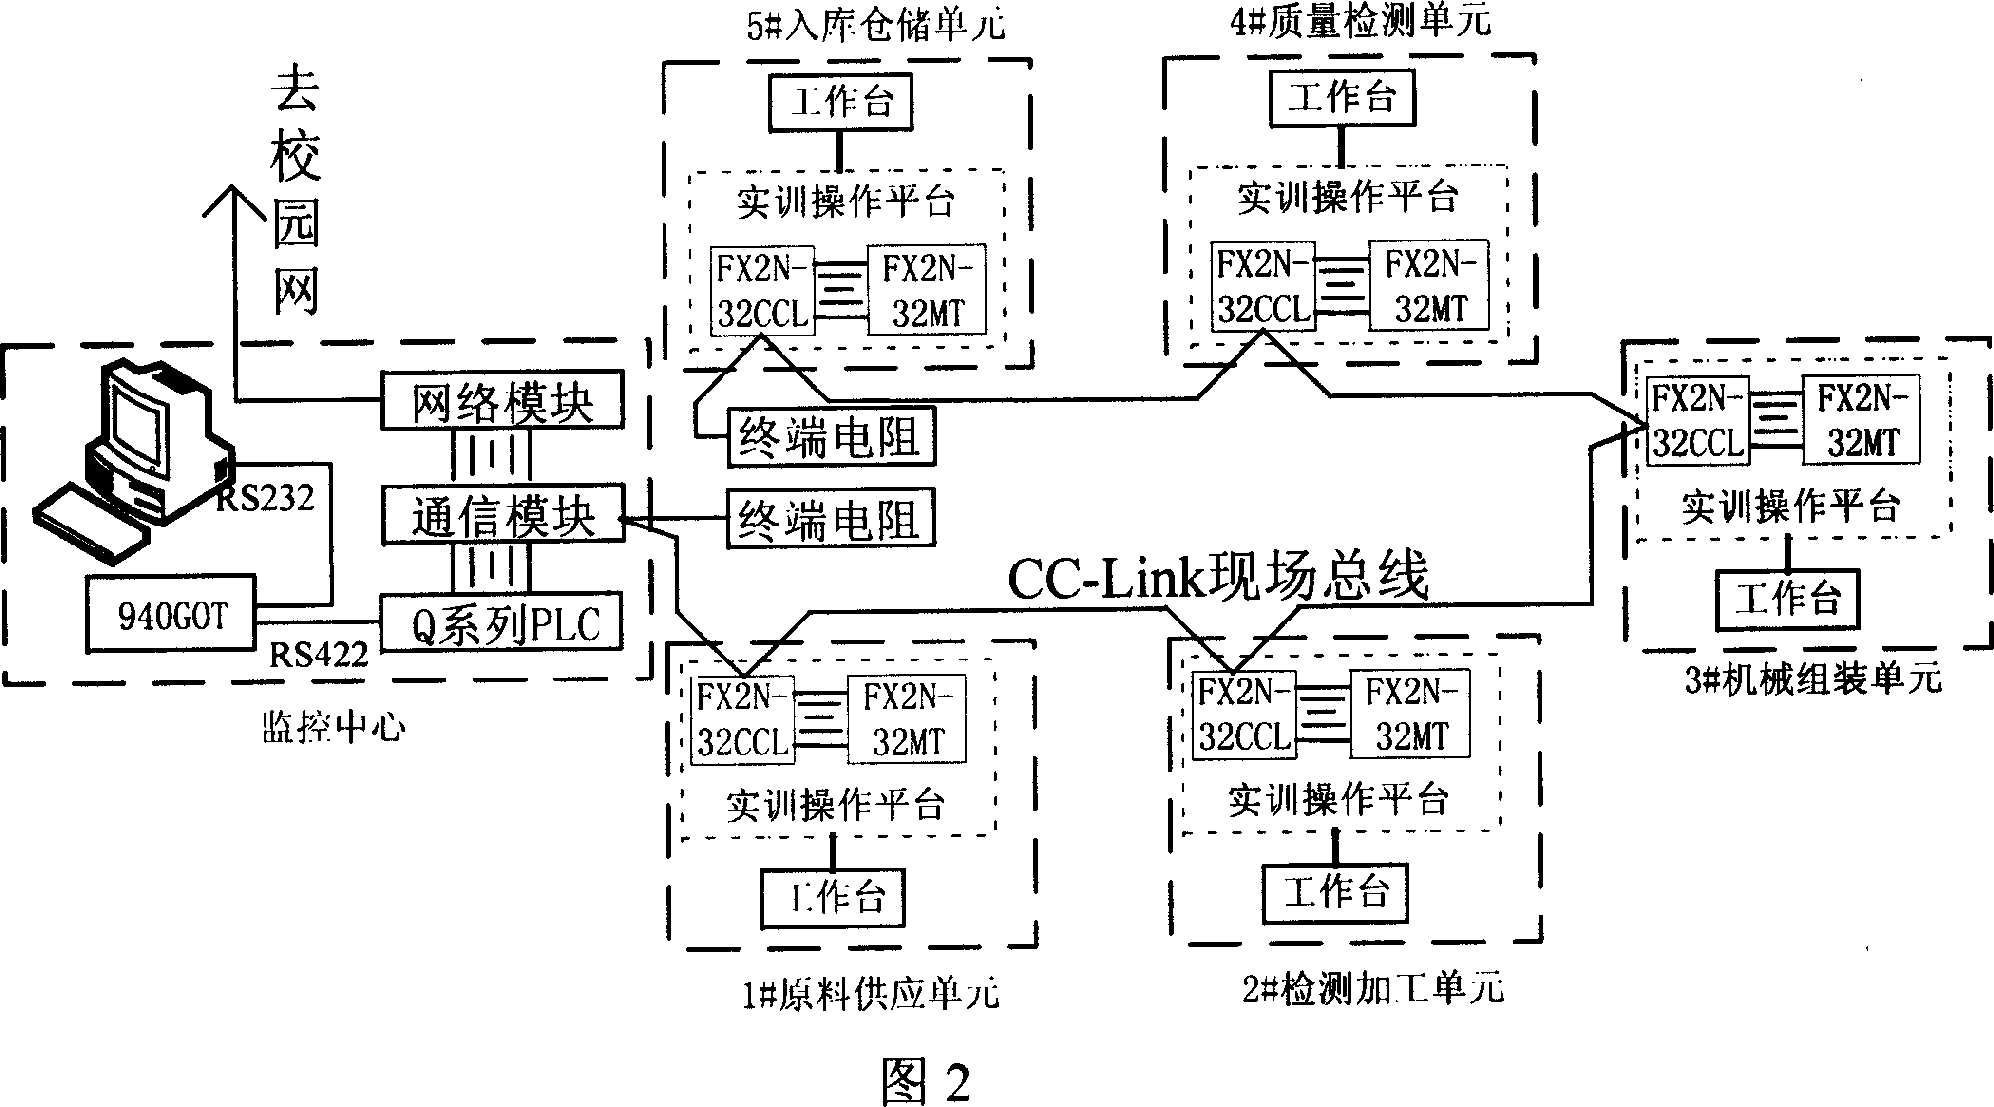 Practicing teaching system of flexible automatic production line based on network control